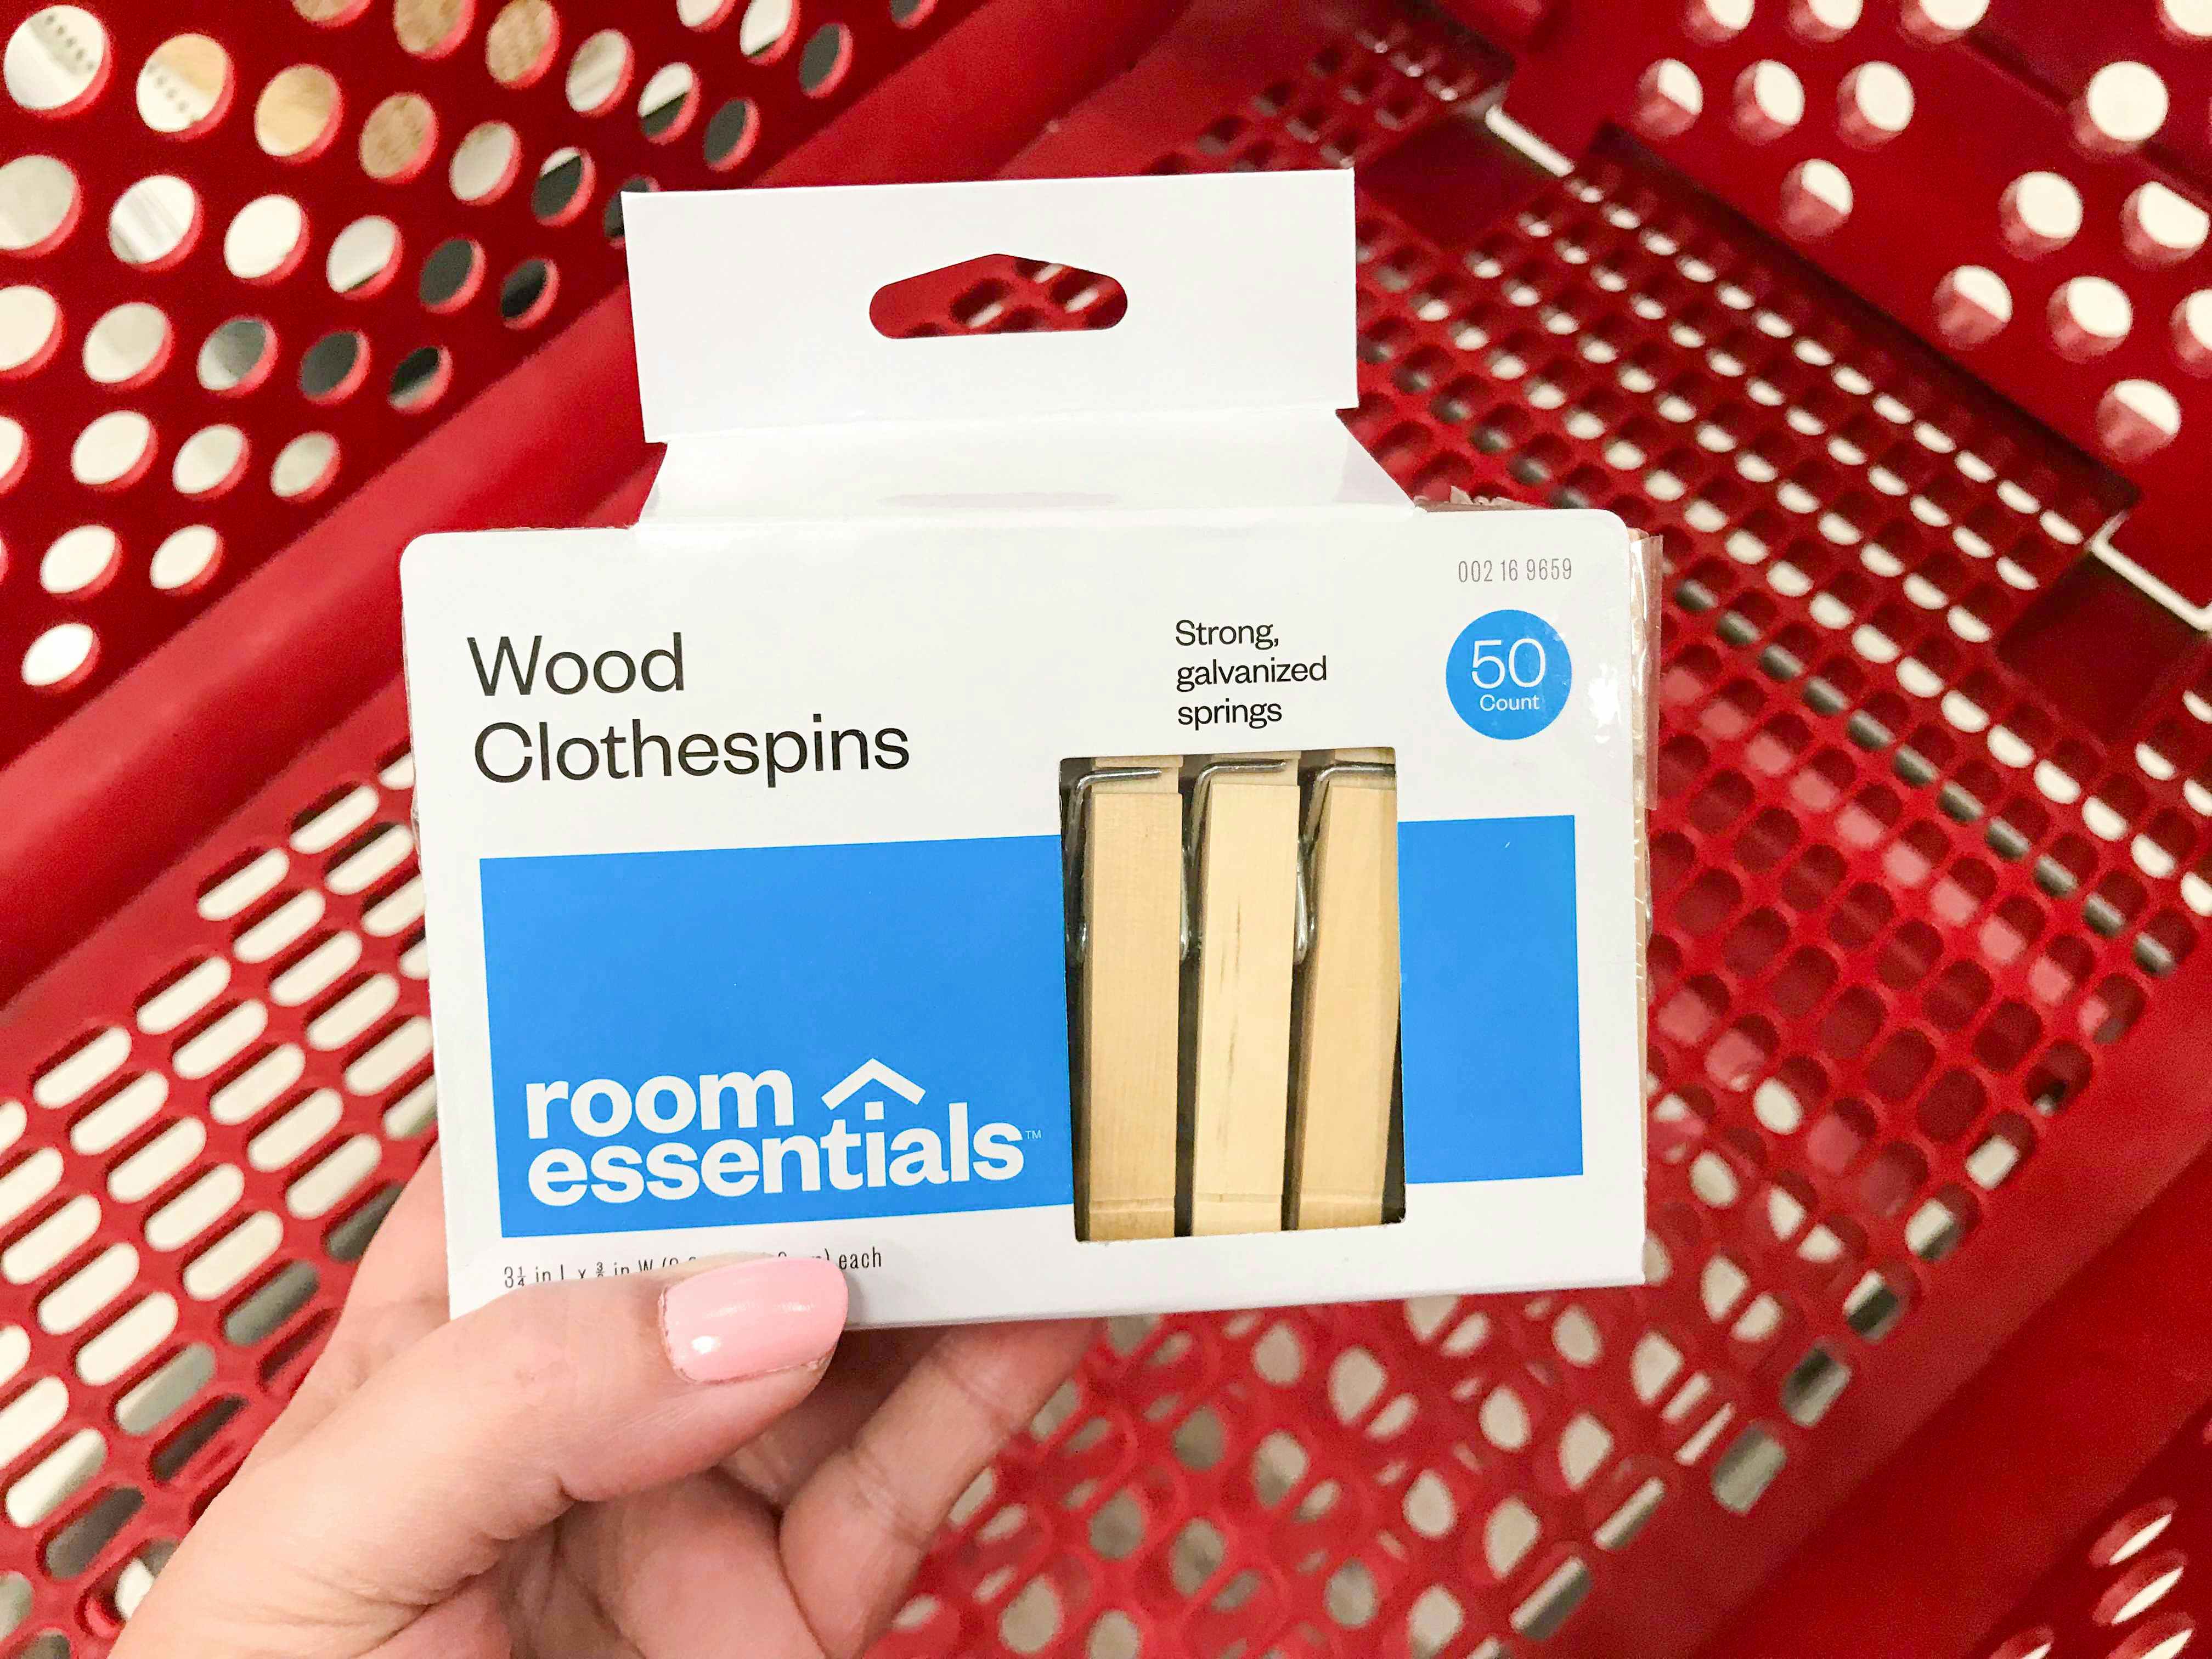 pack of wooden clothespins being held over a shopping cart at Target